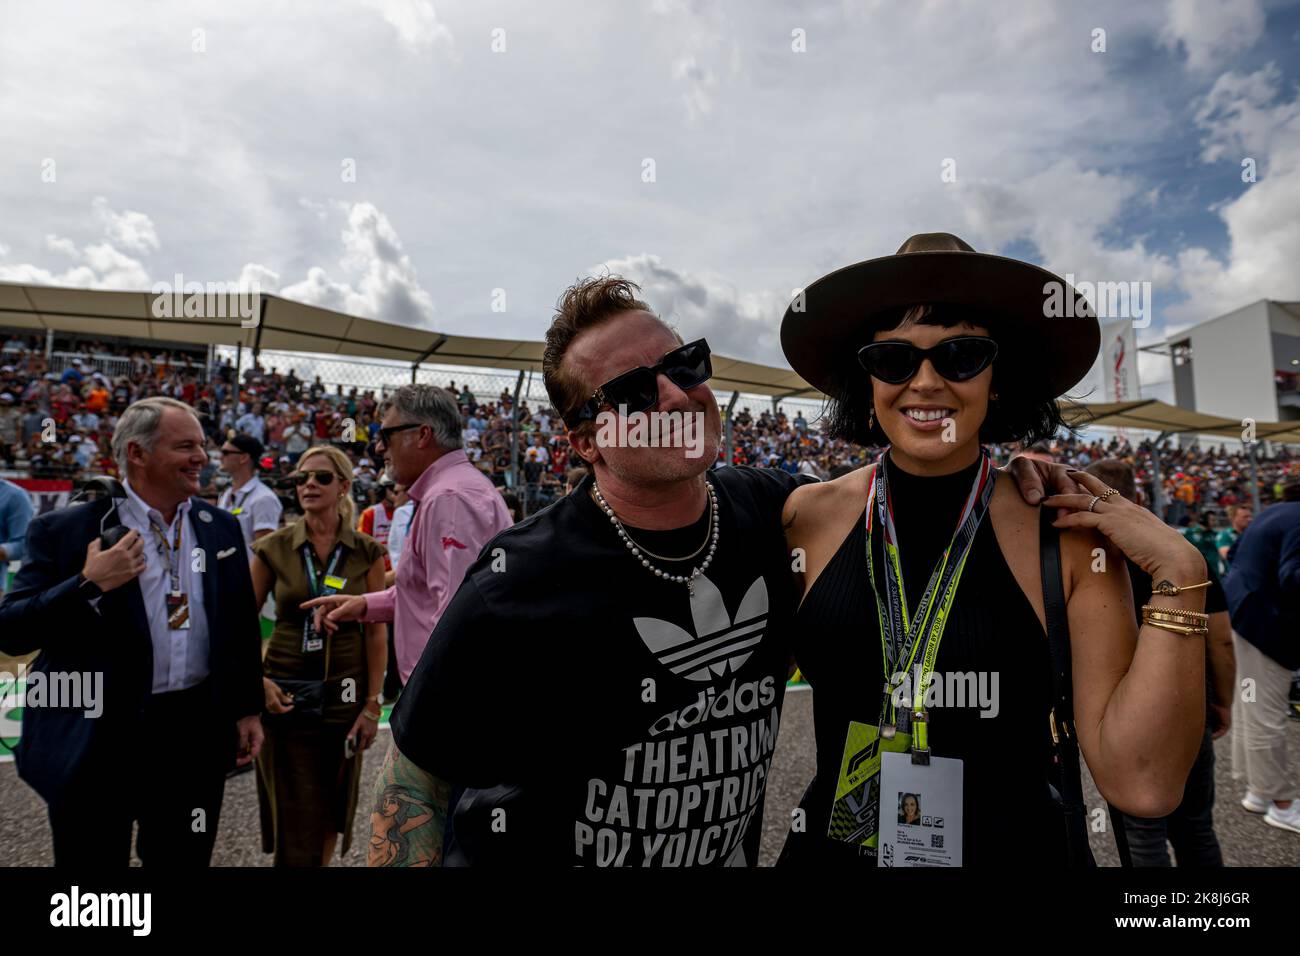 Austin, Texas, United States, 24th Oct 2022, Tre Cool attending race day, round 19 of the 2022 Formula 1 championship. Credit: Michael Potts/Alamy Live News Stock Photo